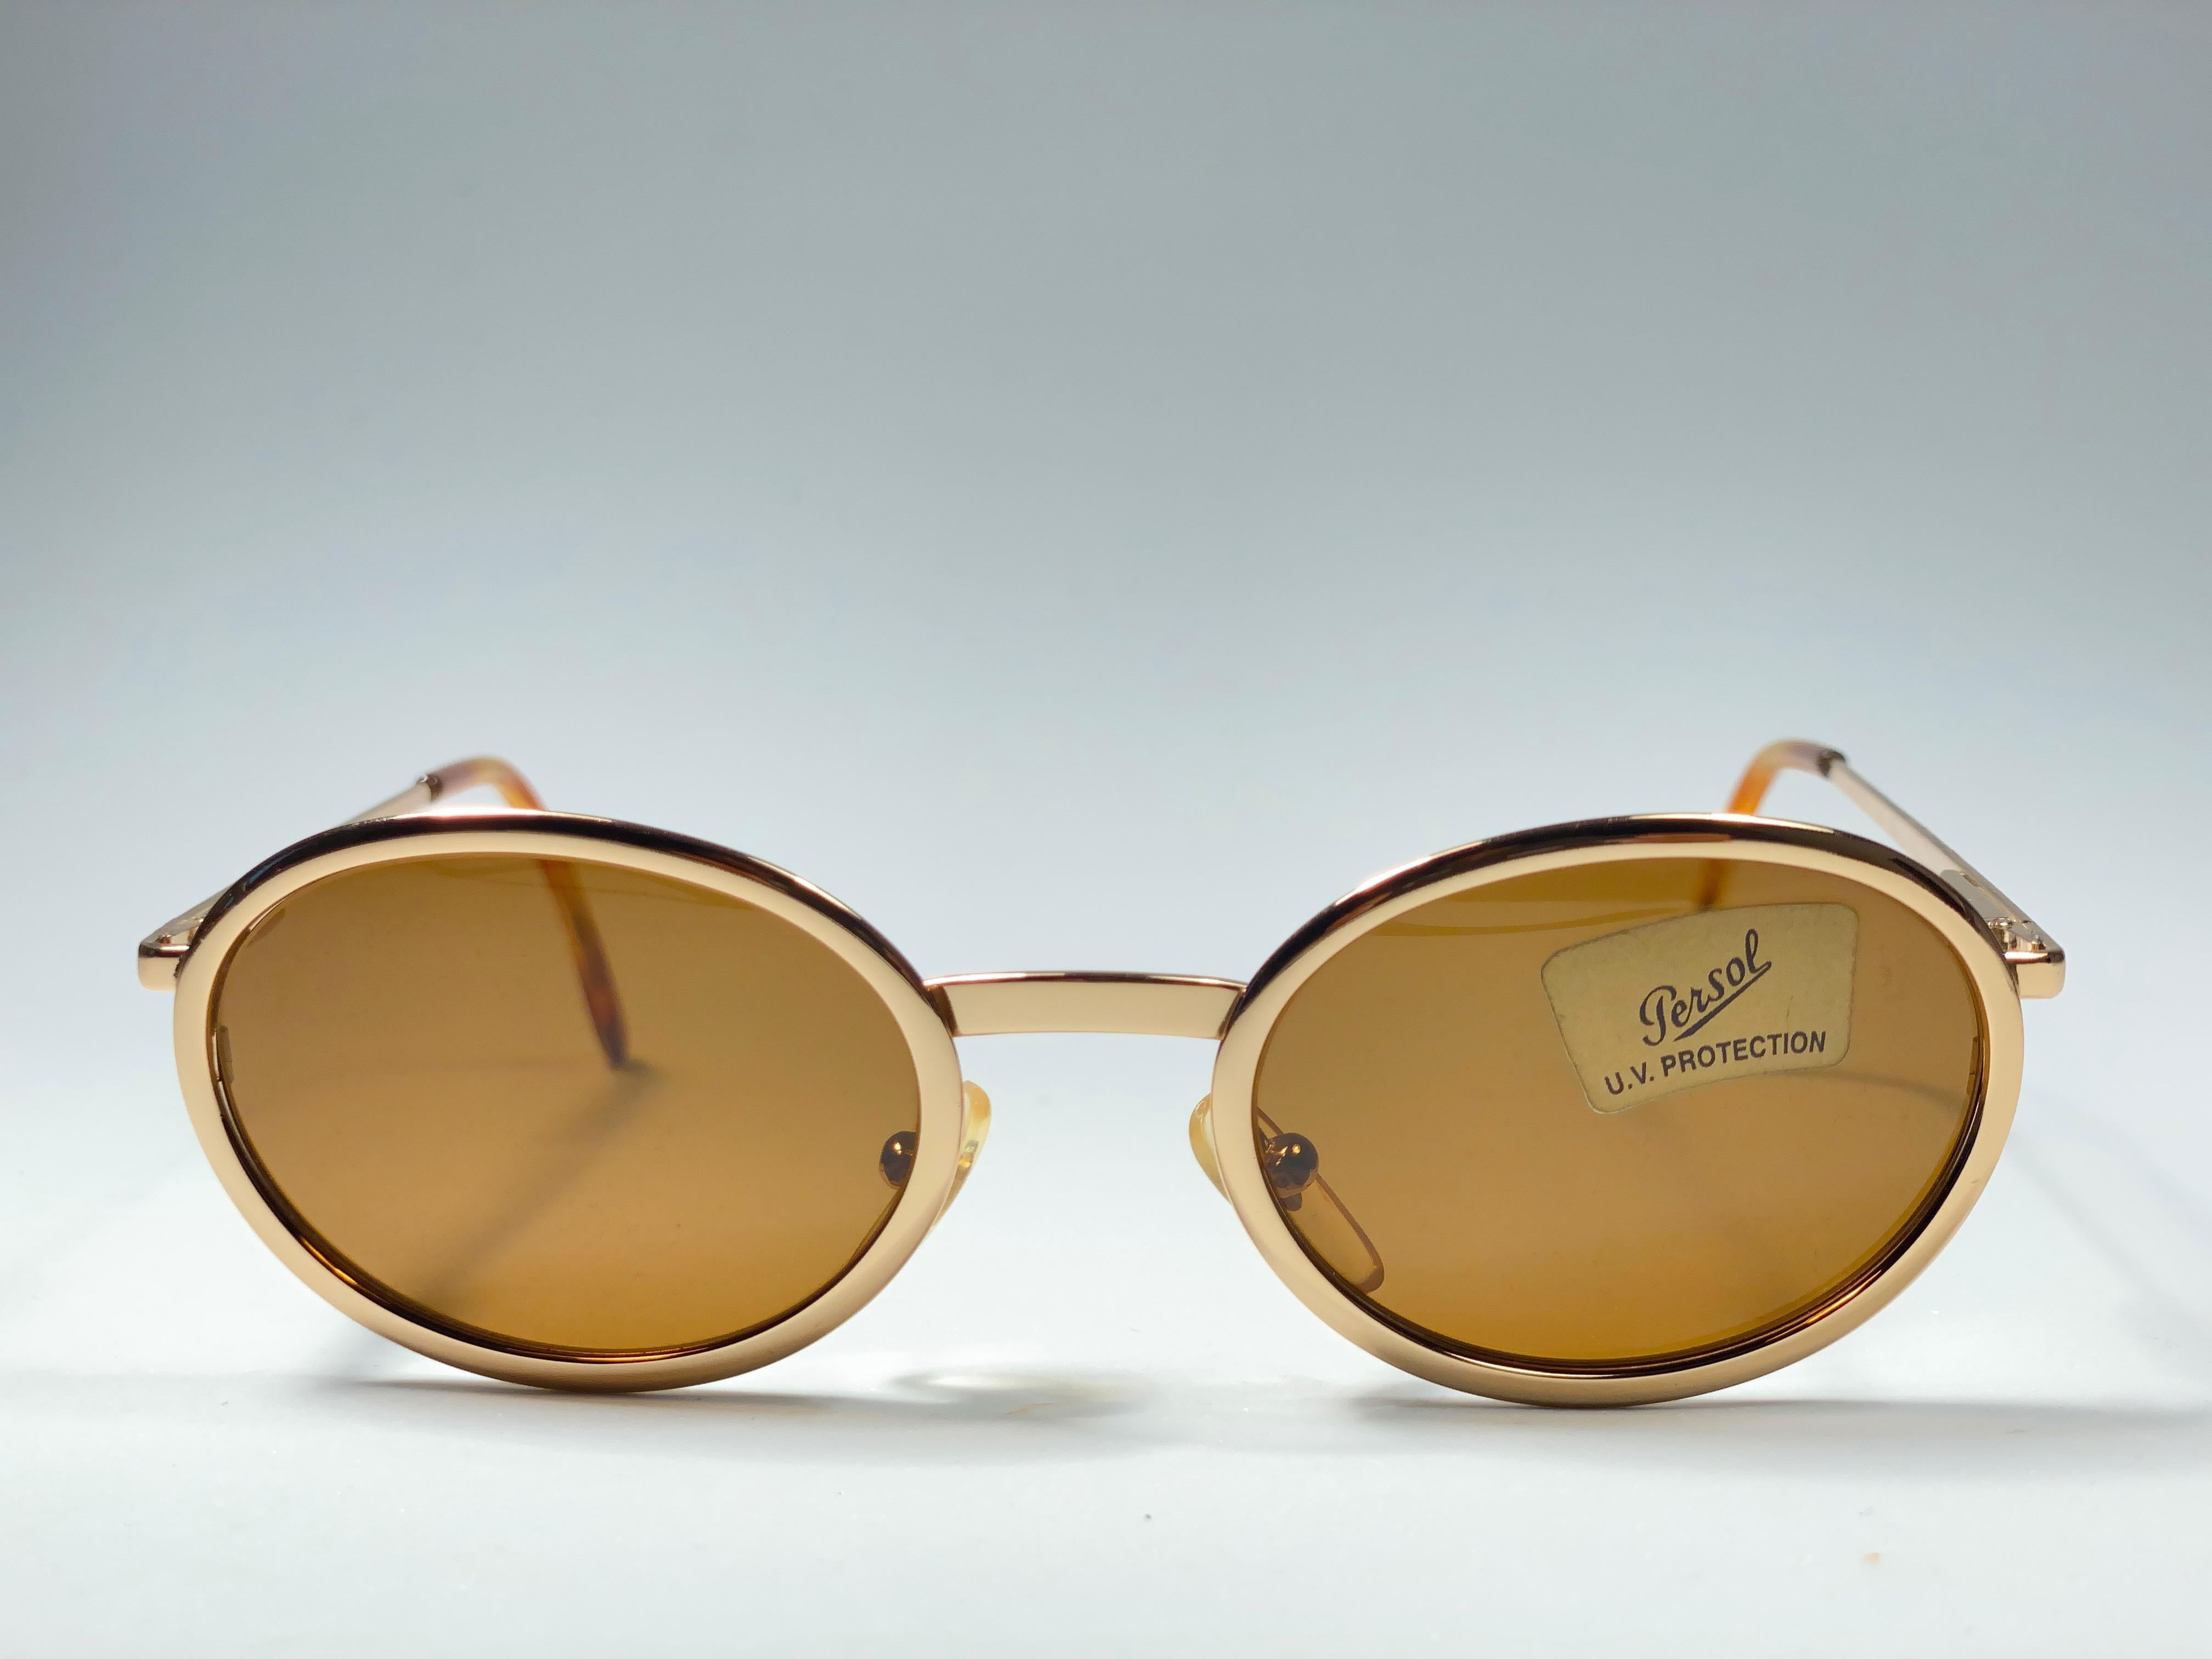 New Vintage Moschino medium size adorned frame. Spotless brown lenses.

Made in Italy.

Produced and design in 1990's.

This item may show minor sign of wear due to storage.